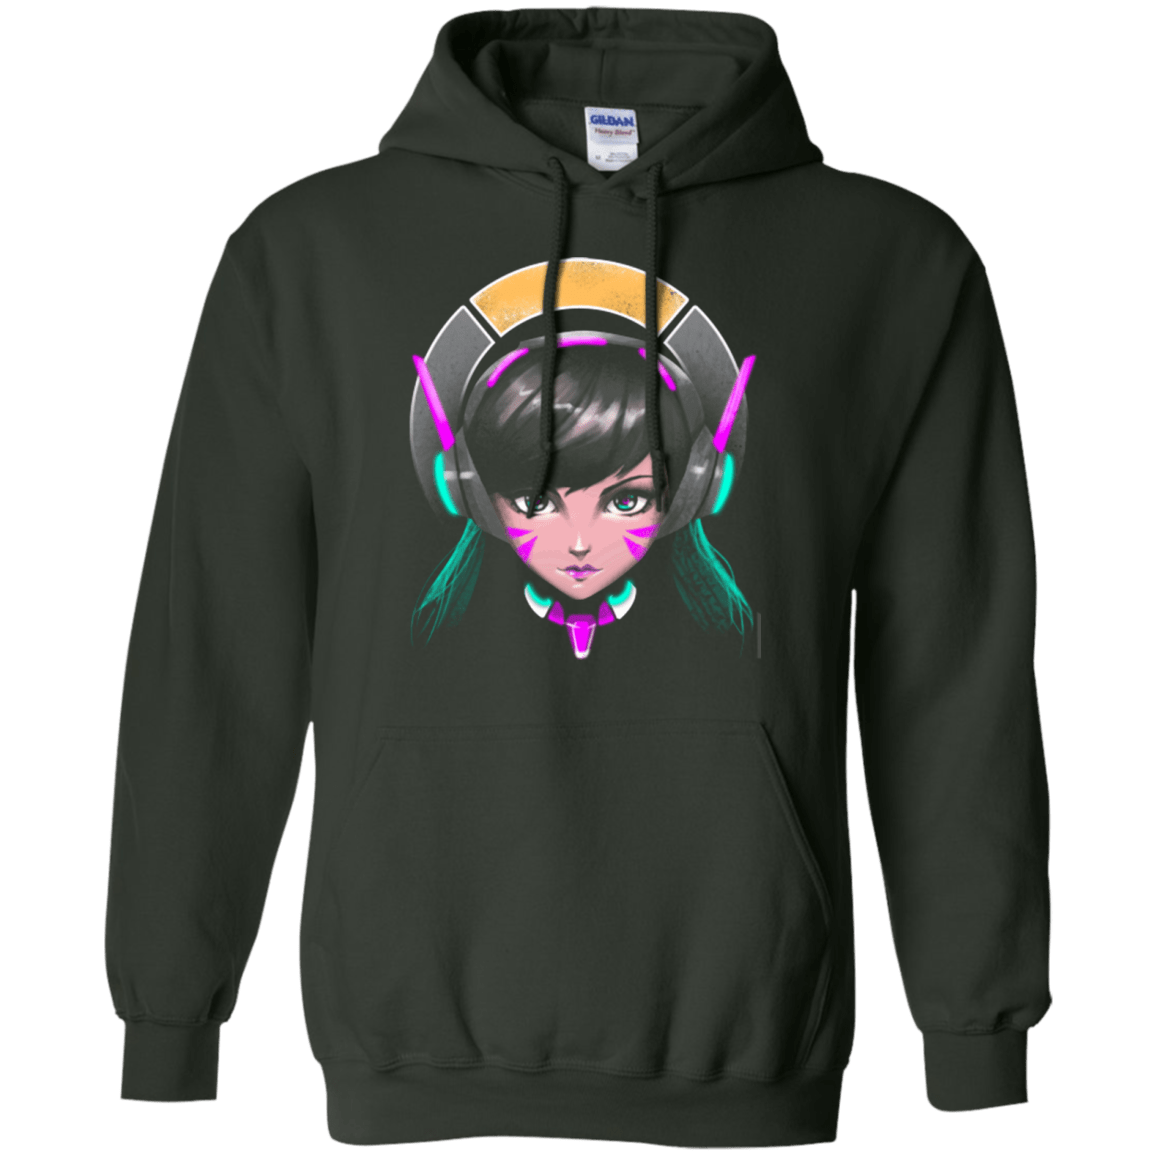 Sweatshirts Forest Green / Small The Gamer Pullover Hoodie